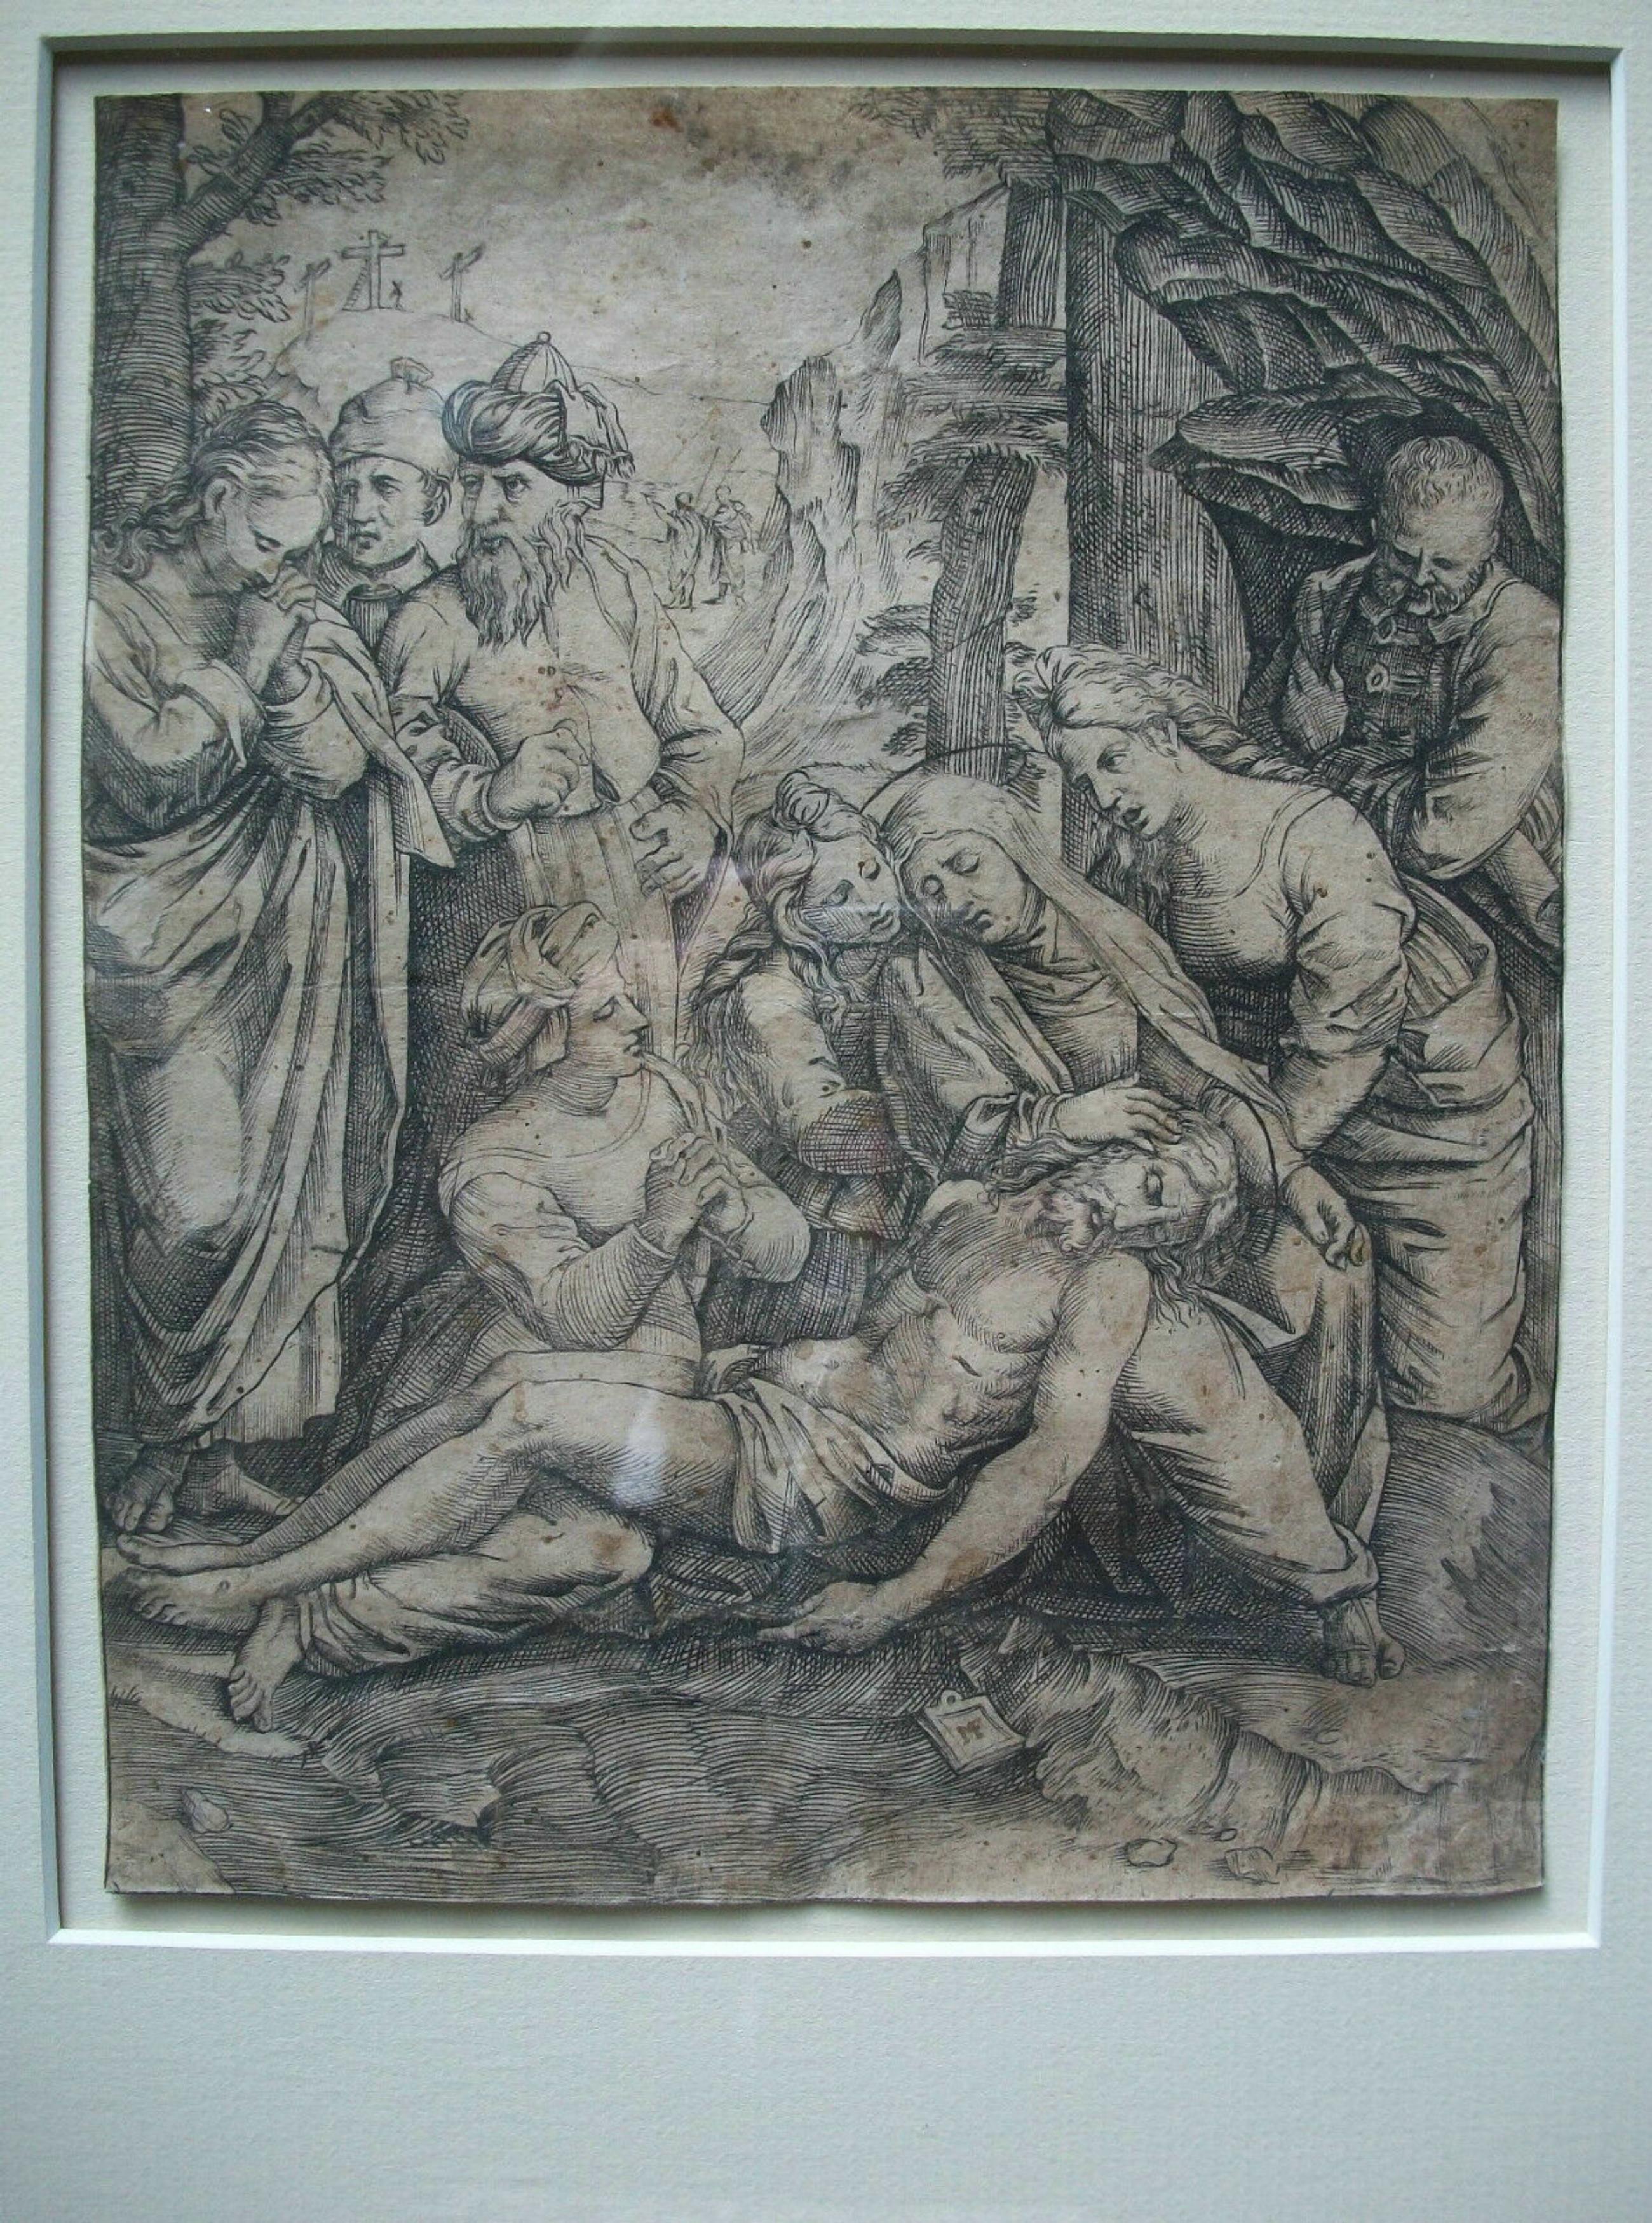 A very rare - finest quality - mid 16th century Italian Renaissance engraving (after Raphael) by an anonymous pupil of MARCANTONIO RAIMONDI (1480-1534) - titled 'Weeping Marys on the Body of Christ' or 'Lamentation'. Collector's Initials - MF -